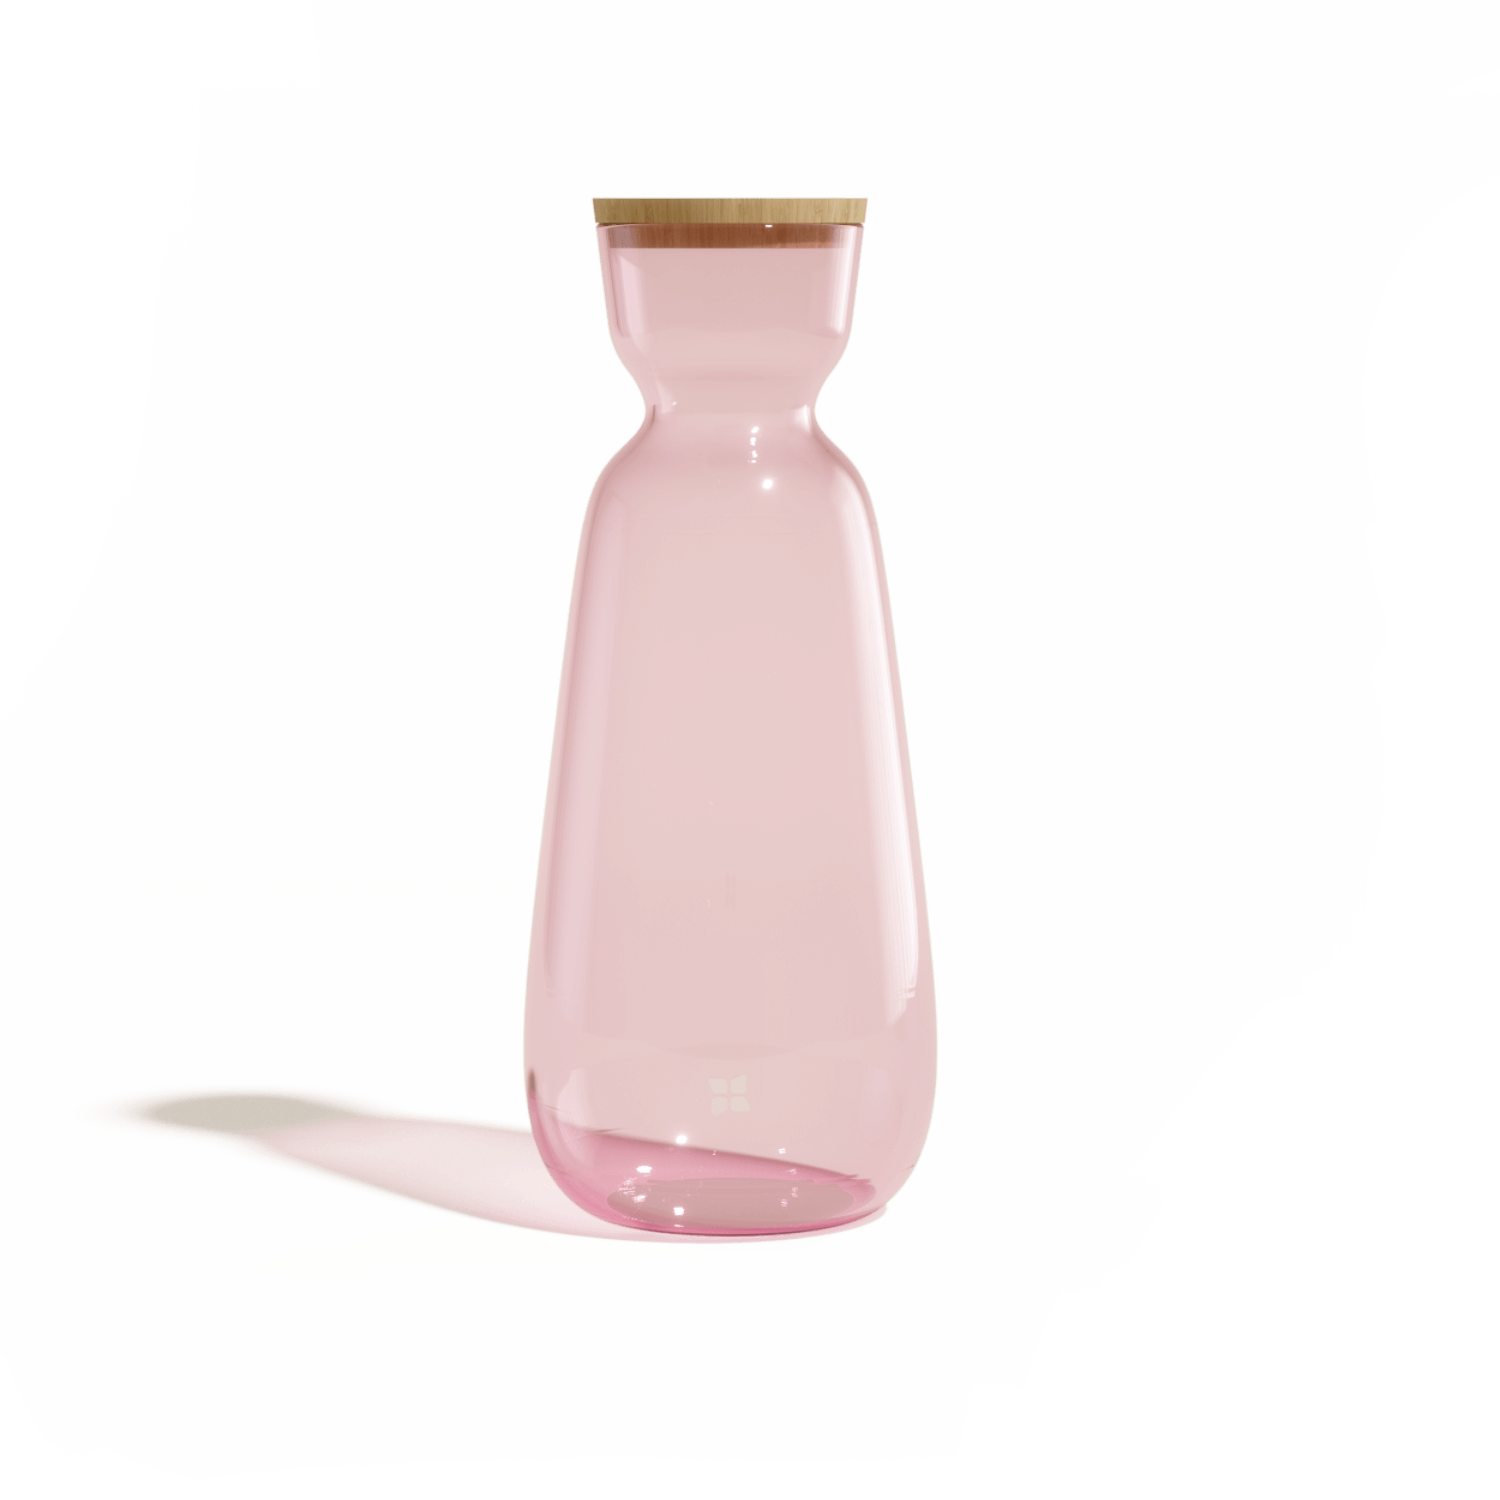 Waterdrop Glass Carafe Large - Light Pink Clear - 40oz - High Quality Borosilicate Glass - Bamboo Lid